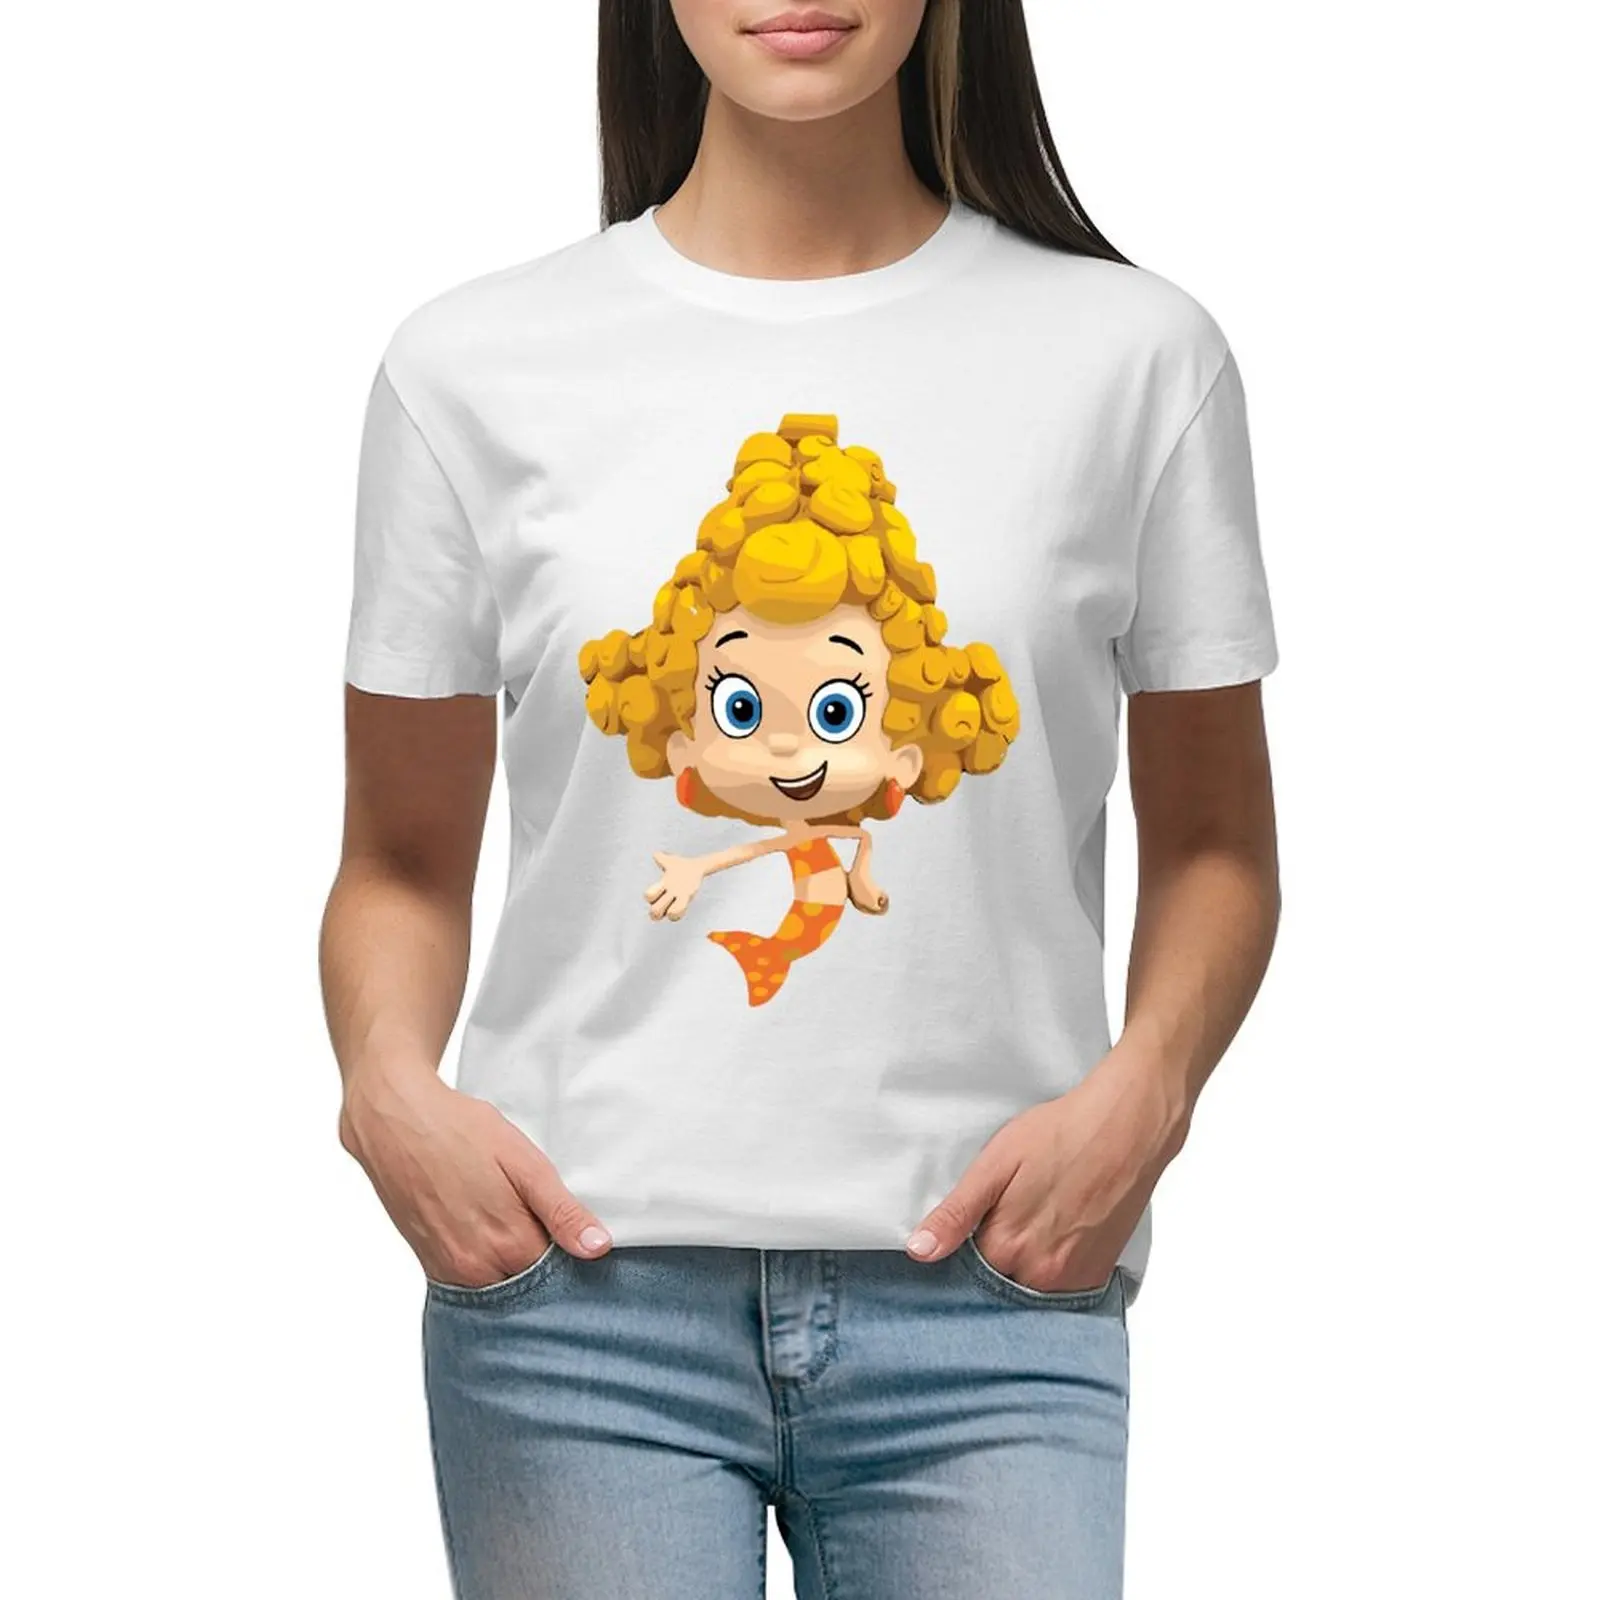 

Funny Bubble Guppies Company T-shirt female cute tops Summer Women's clothing